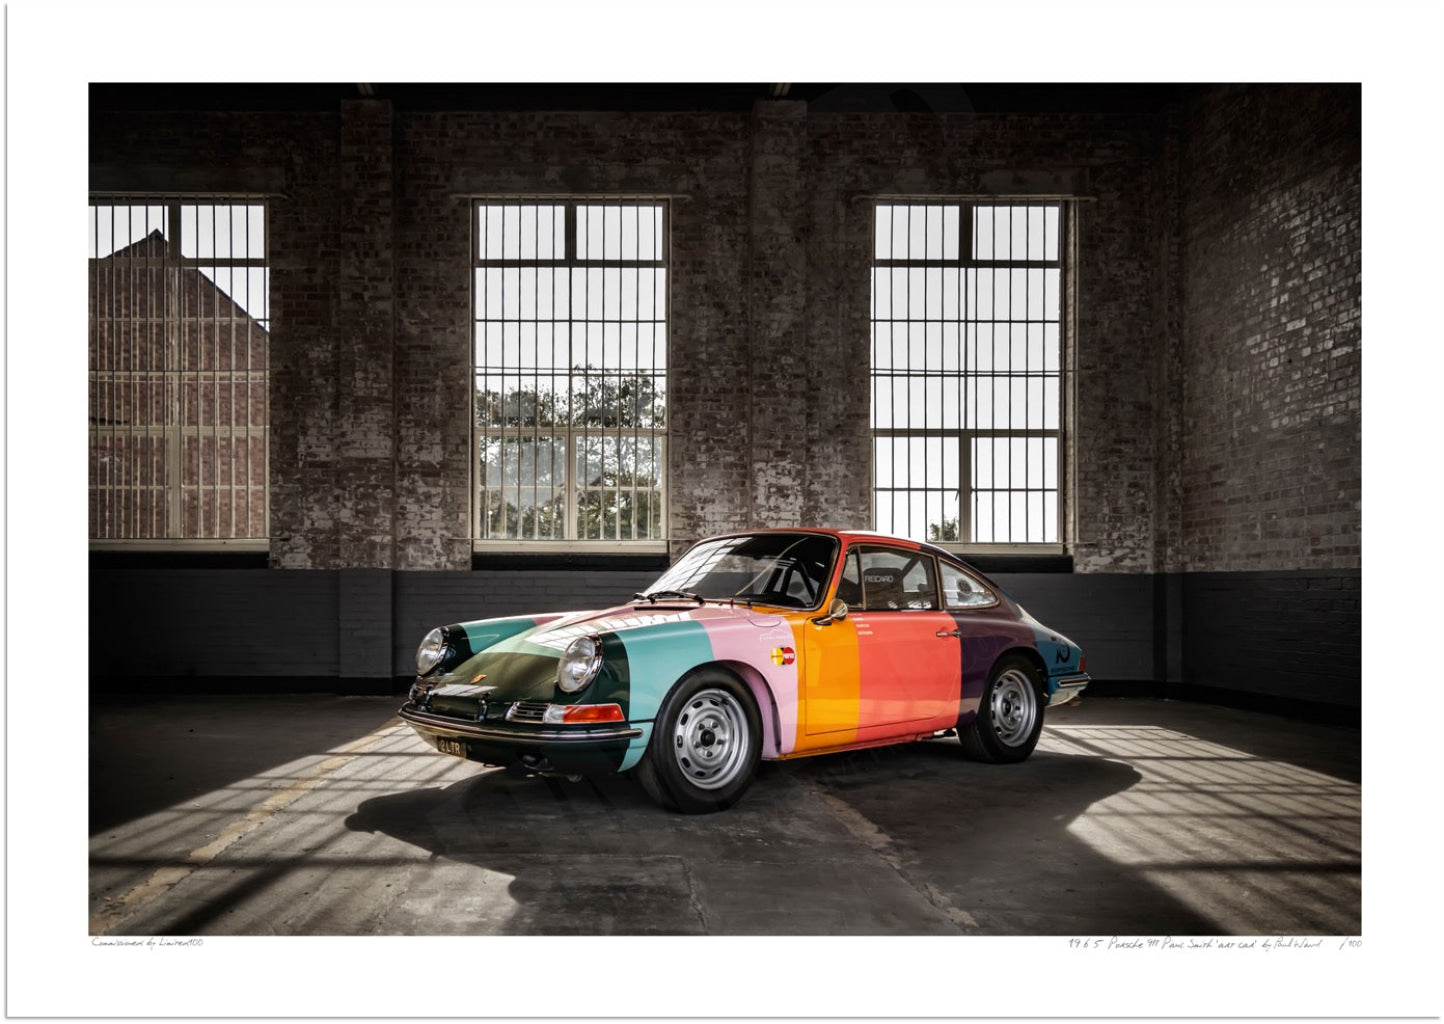 Image of 1965 Porsche 911 Paul Smith 'art car' at Bicester Heritage